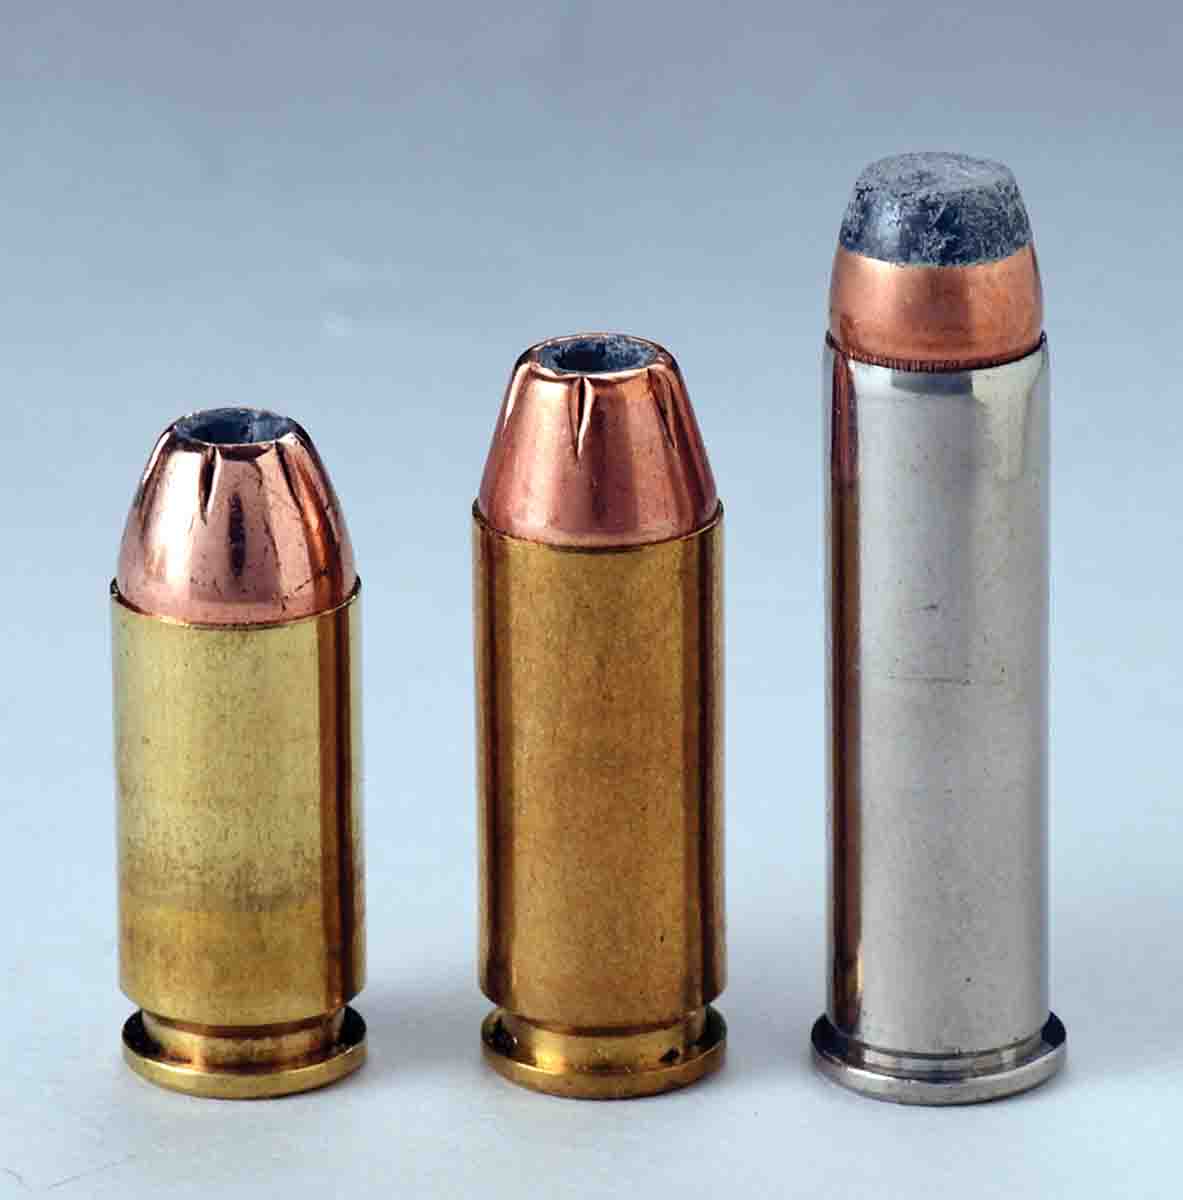 These cartridges include (left to right): a .40 S&W round with no crimp, a 10mm Auto with a light taper crimp  and a .357 Magnum revolver round with a pronounced roll crimp. The .40 and 10mm need a positive case mouth edge exposed for proper headspacing while the rimmed revolver round does not.